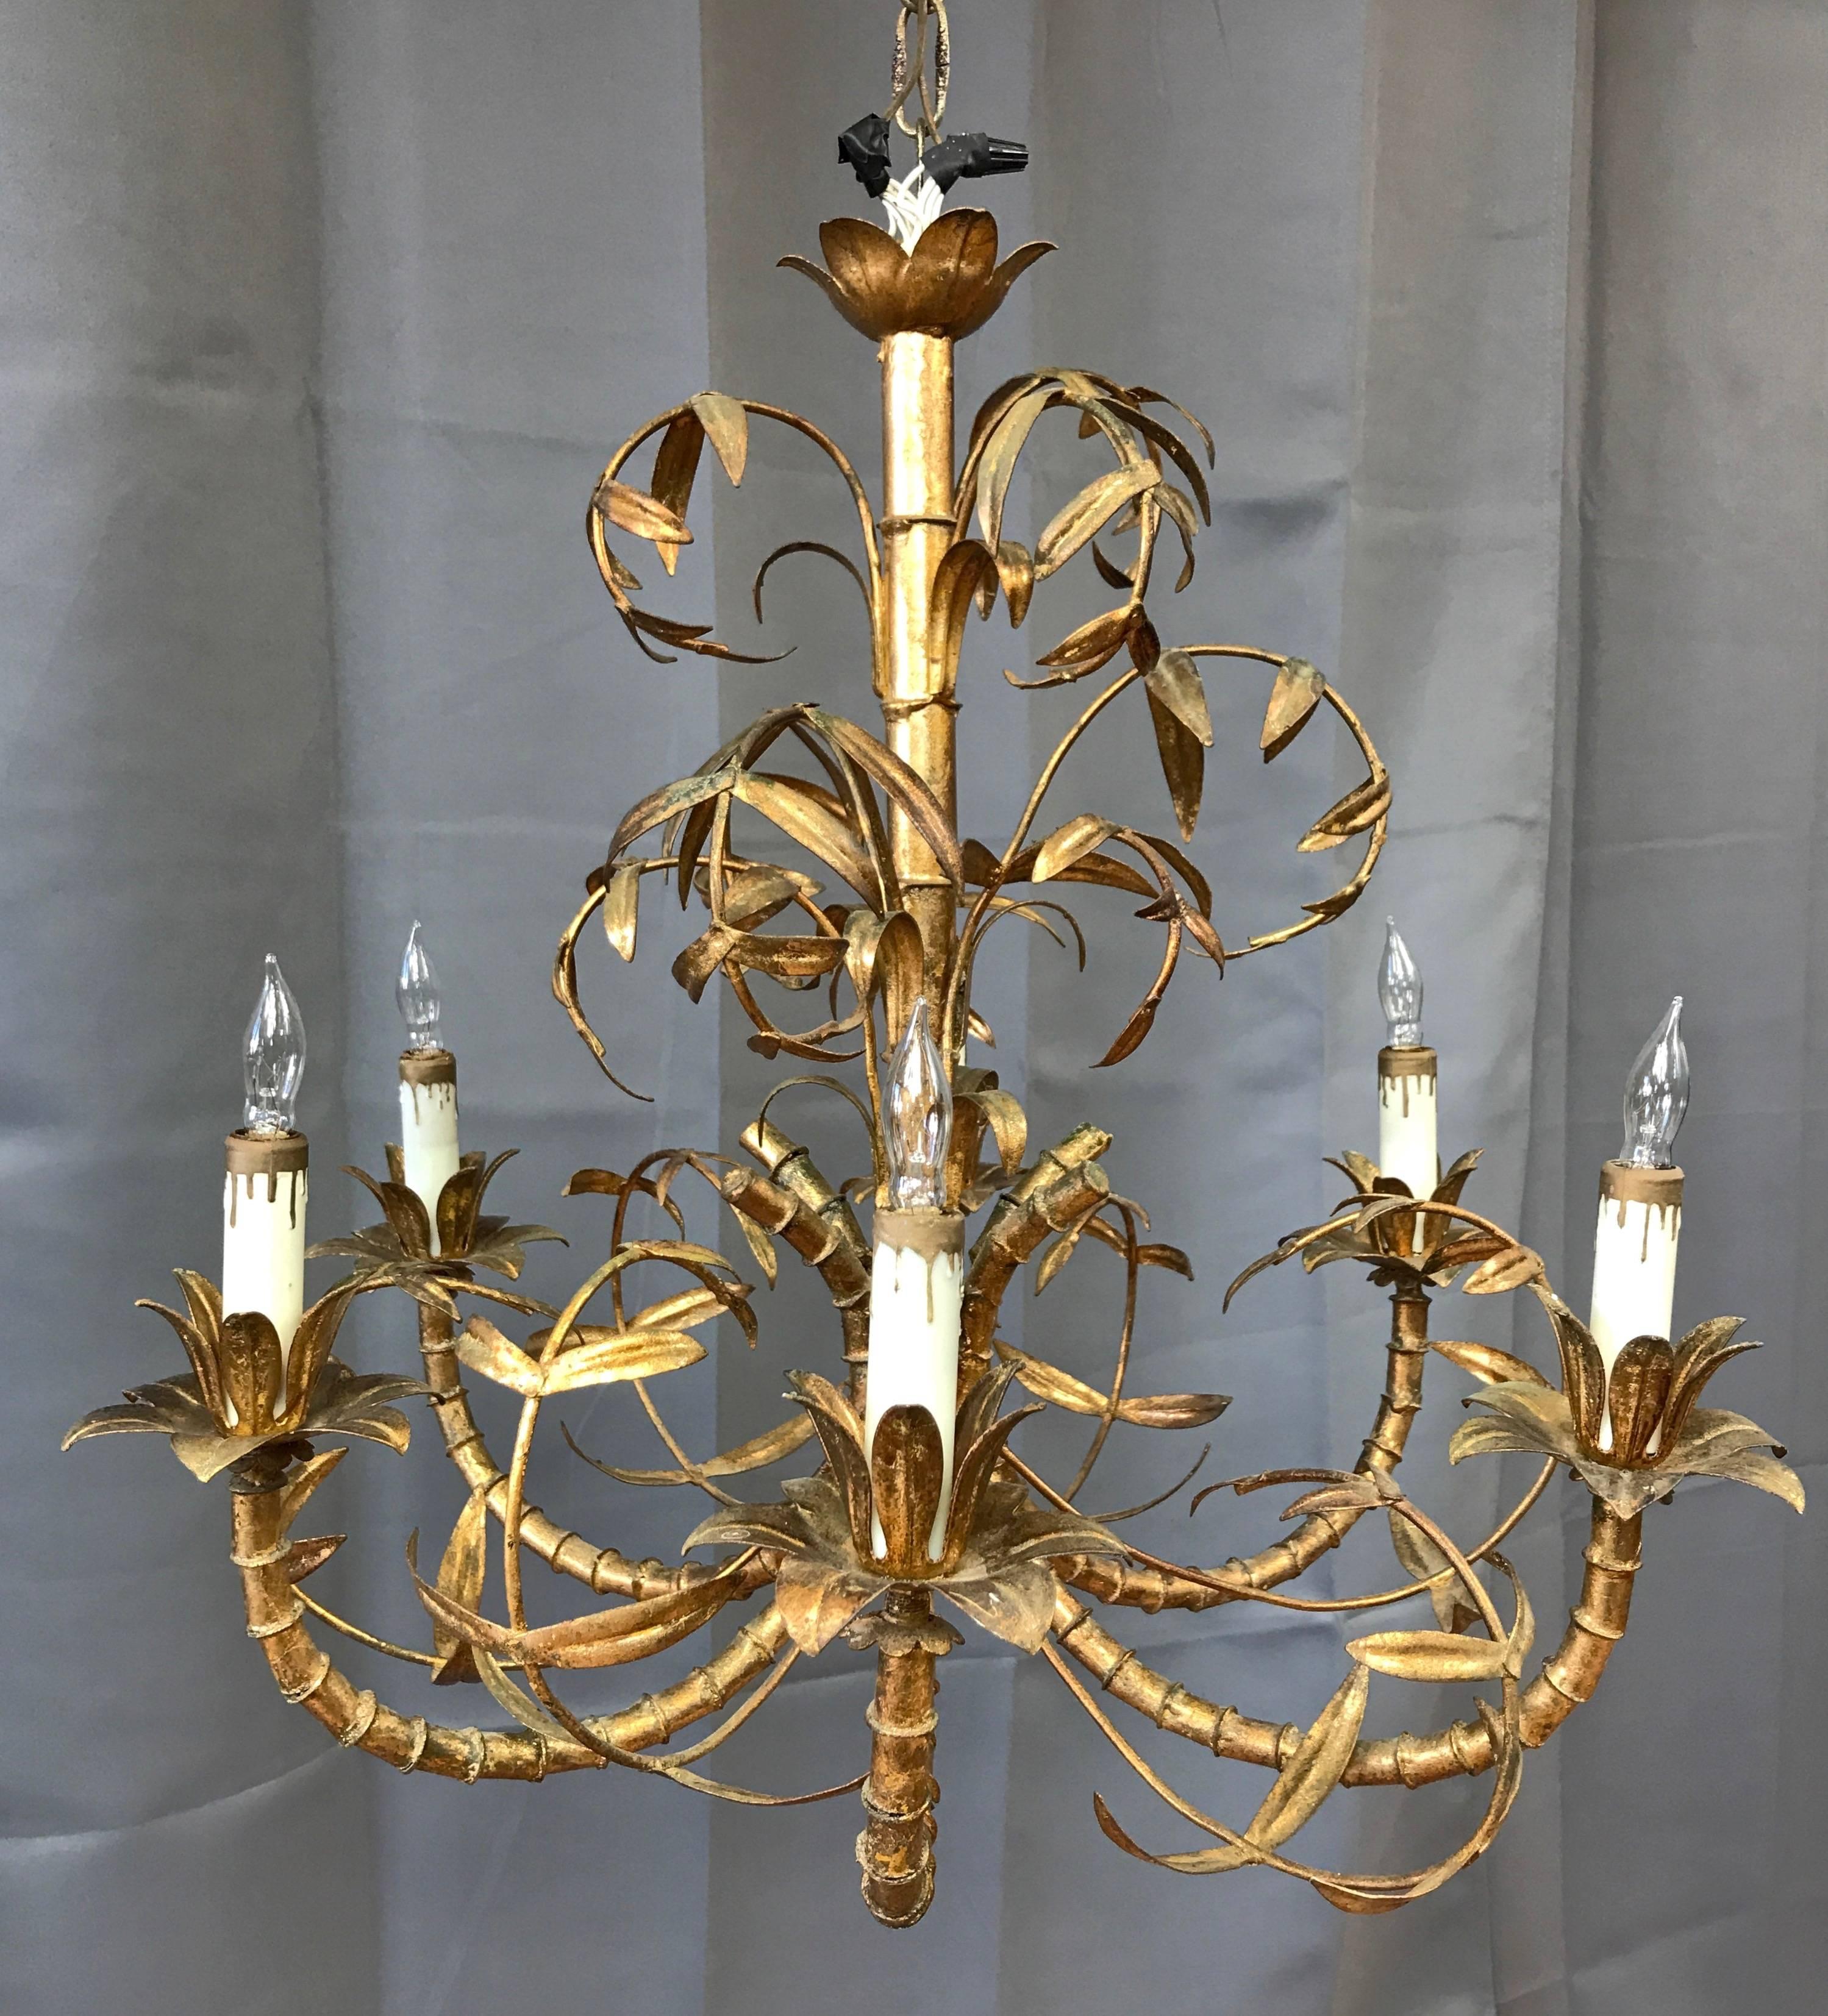 An elegant and enchanting Italian Mid-Century chinoiserie faux bamboo six-light chandelier with gold leaf finish.

Artistically rendered faux bamboo metal shaft and arms sprout delicate and detailed foliage that’s exquisitely executed. Gold leaf